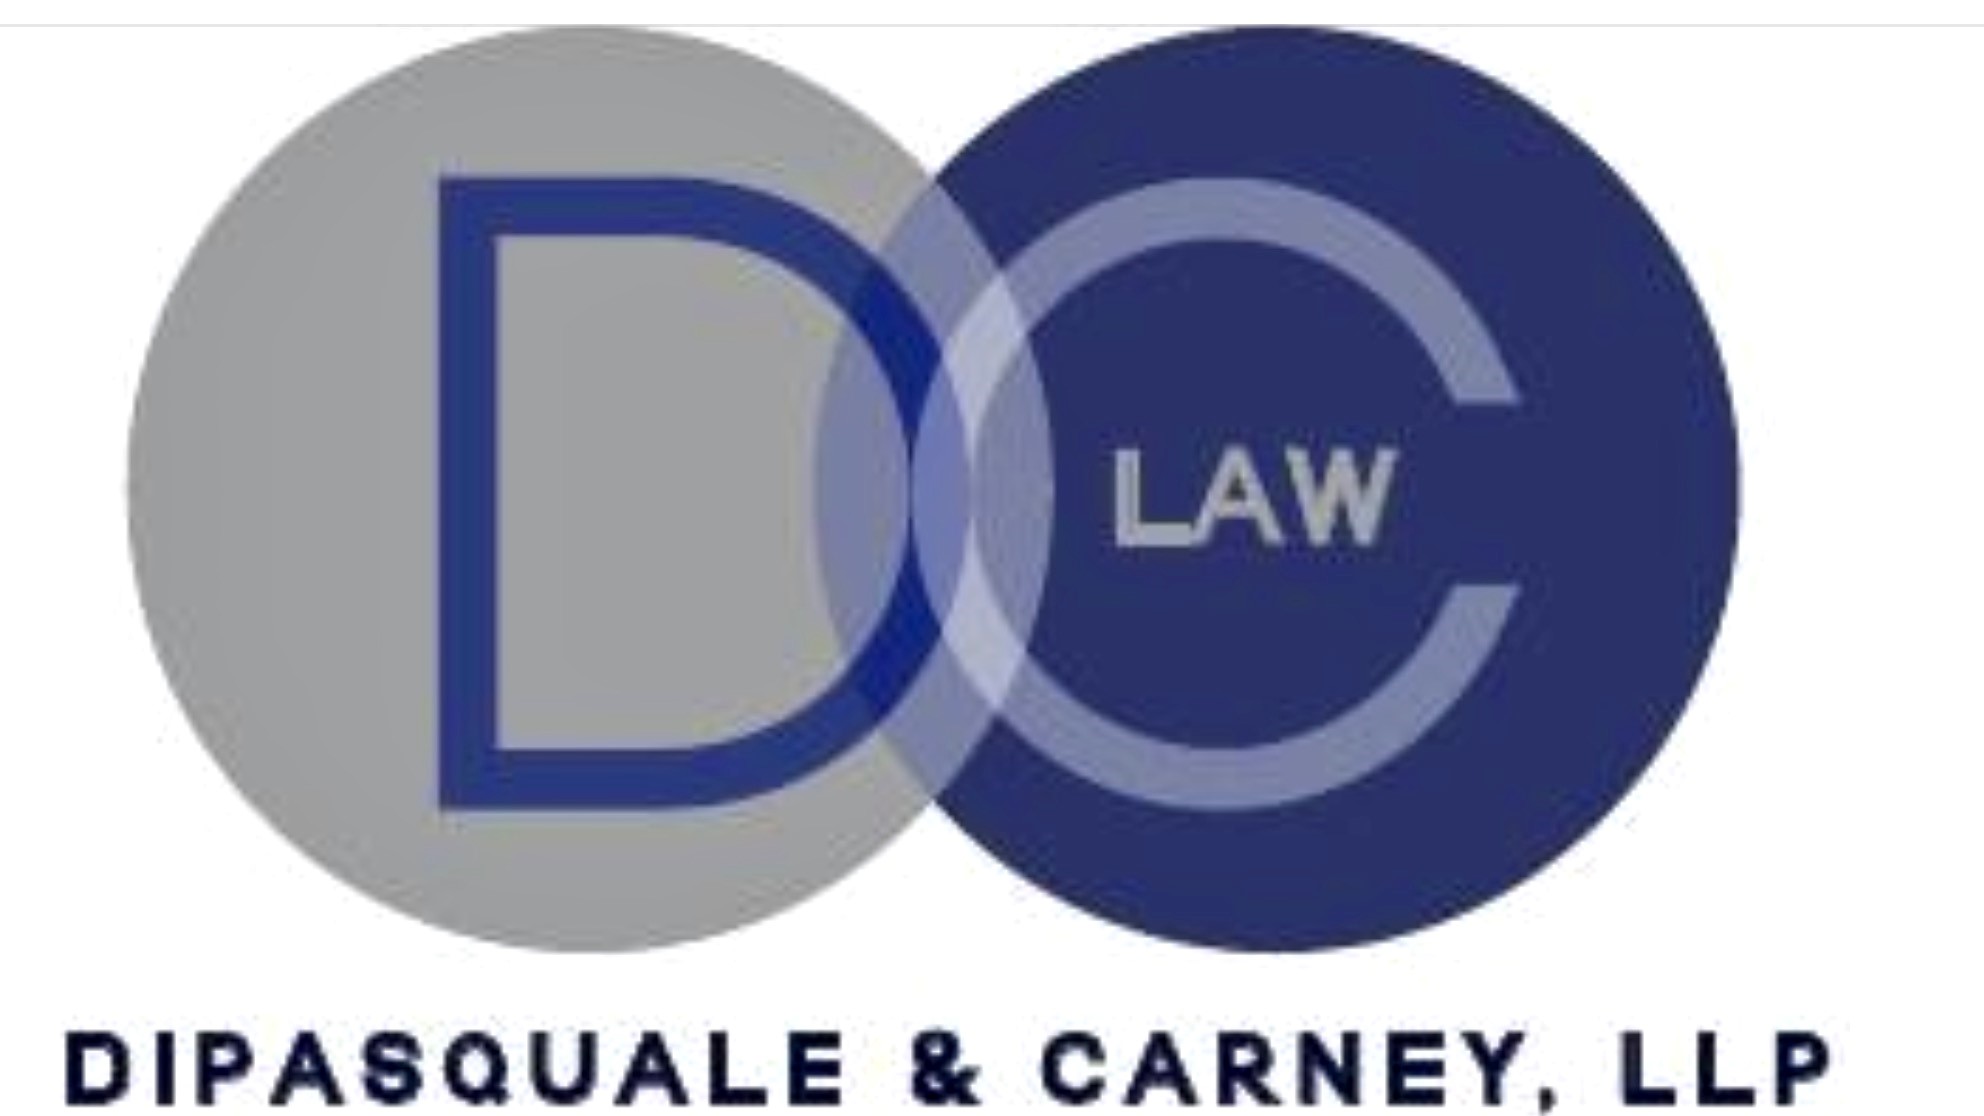 DiPasquale & Carney Law